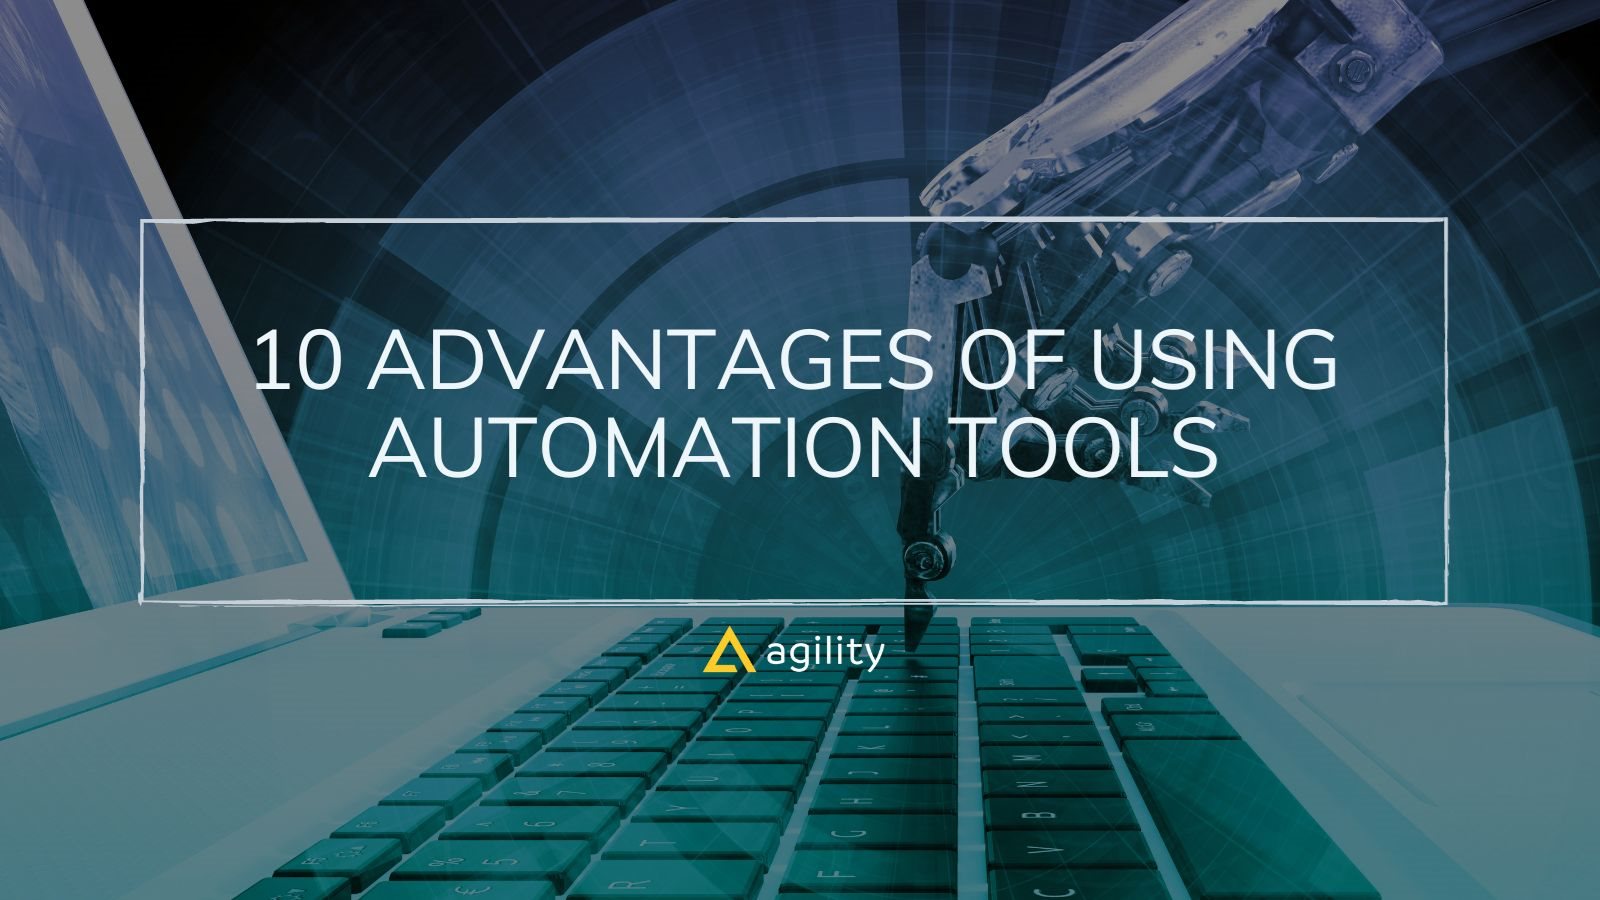 10 Advantages of Using Automation Tools